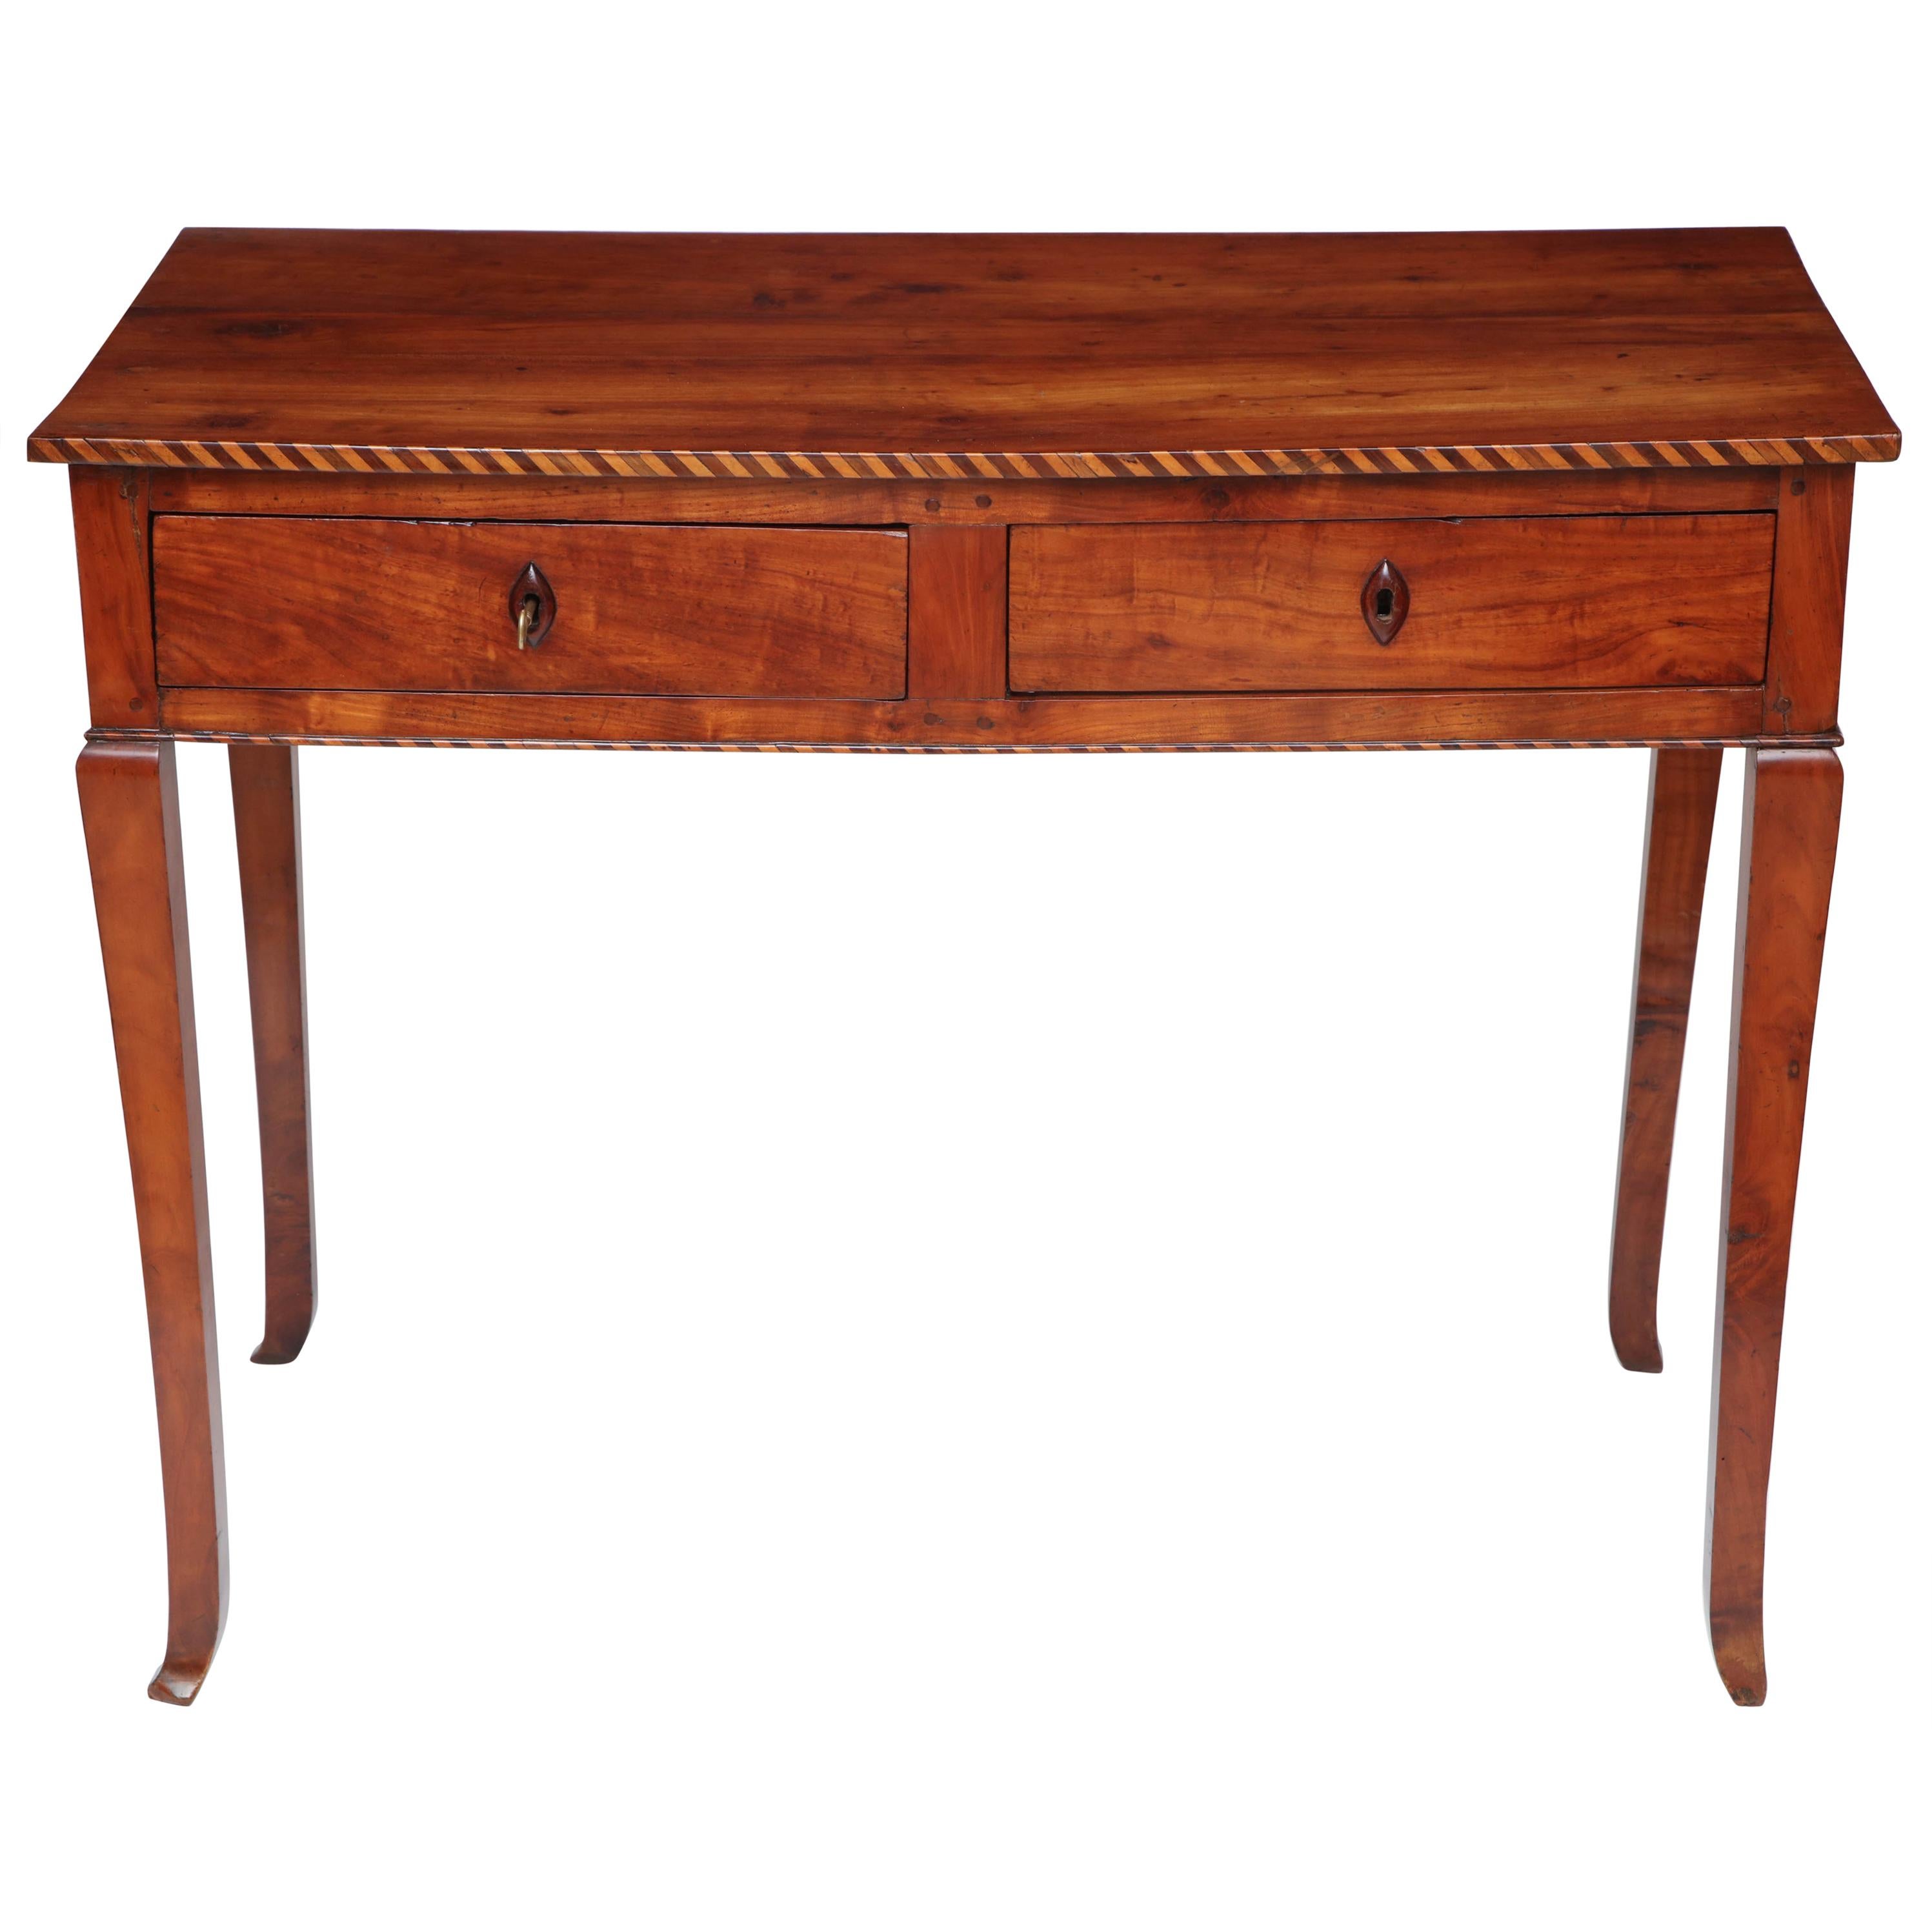 18th Century Italian Cherry Table with Parquetry Border and Two Drawers